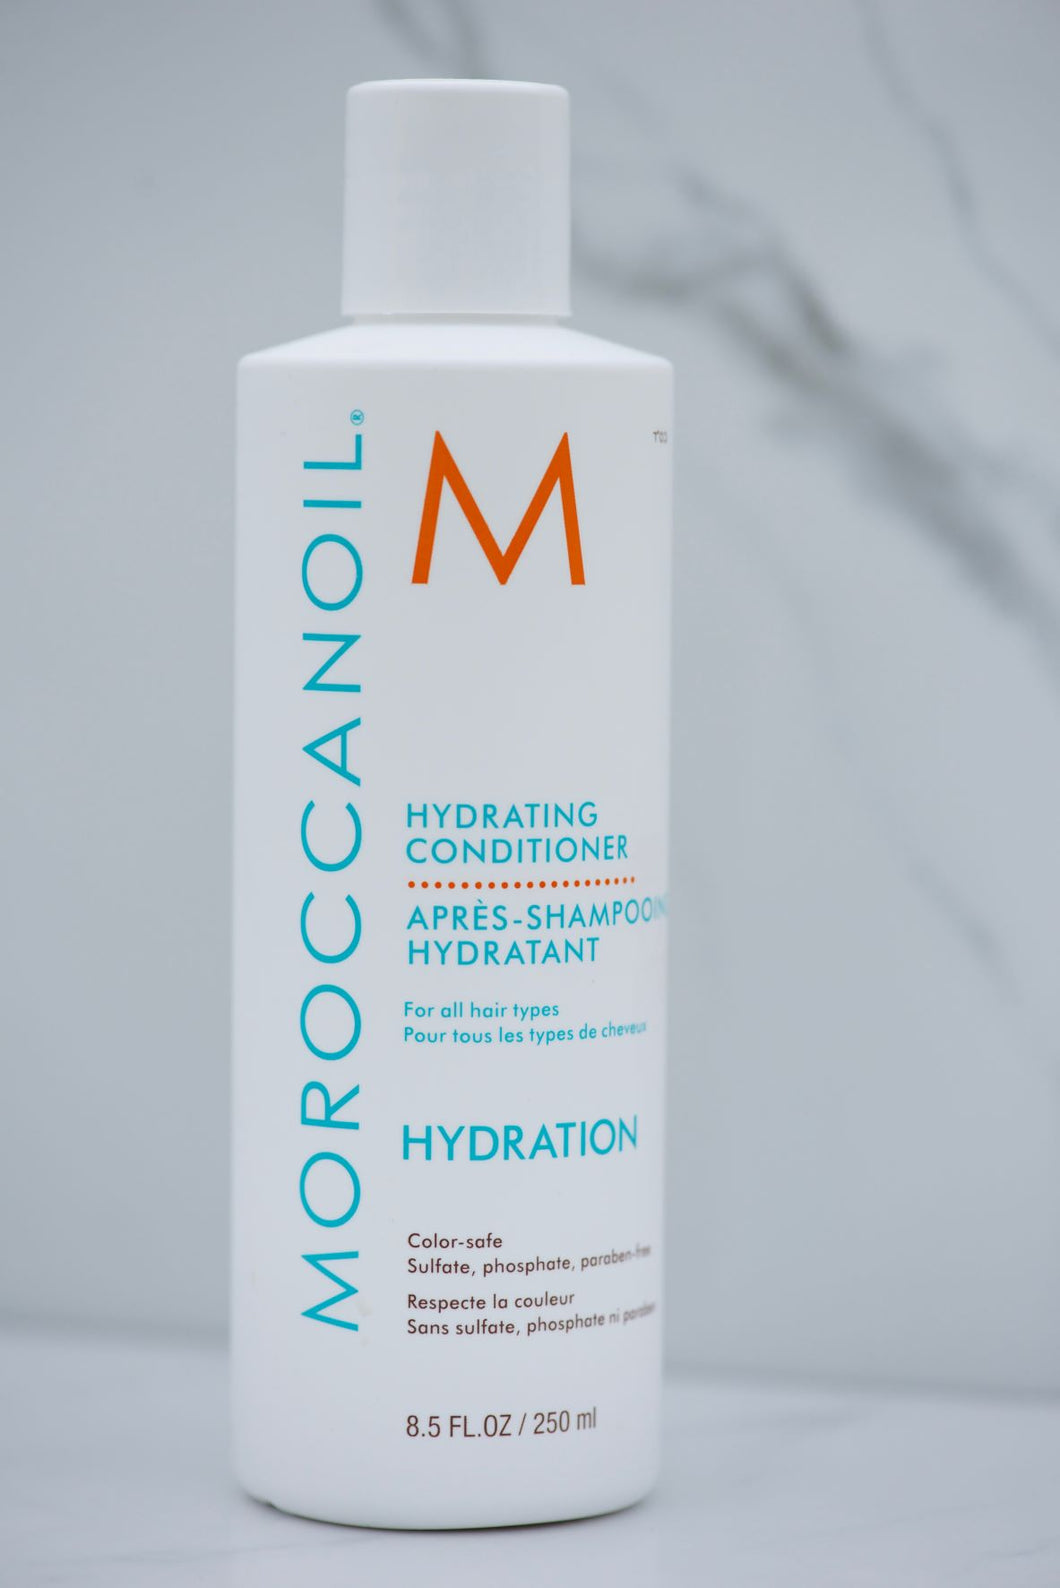 Hydrating Conditioner by Moroccanoil